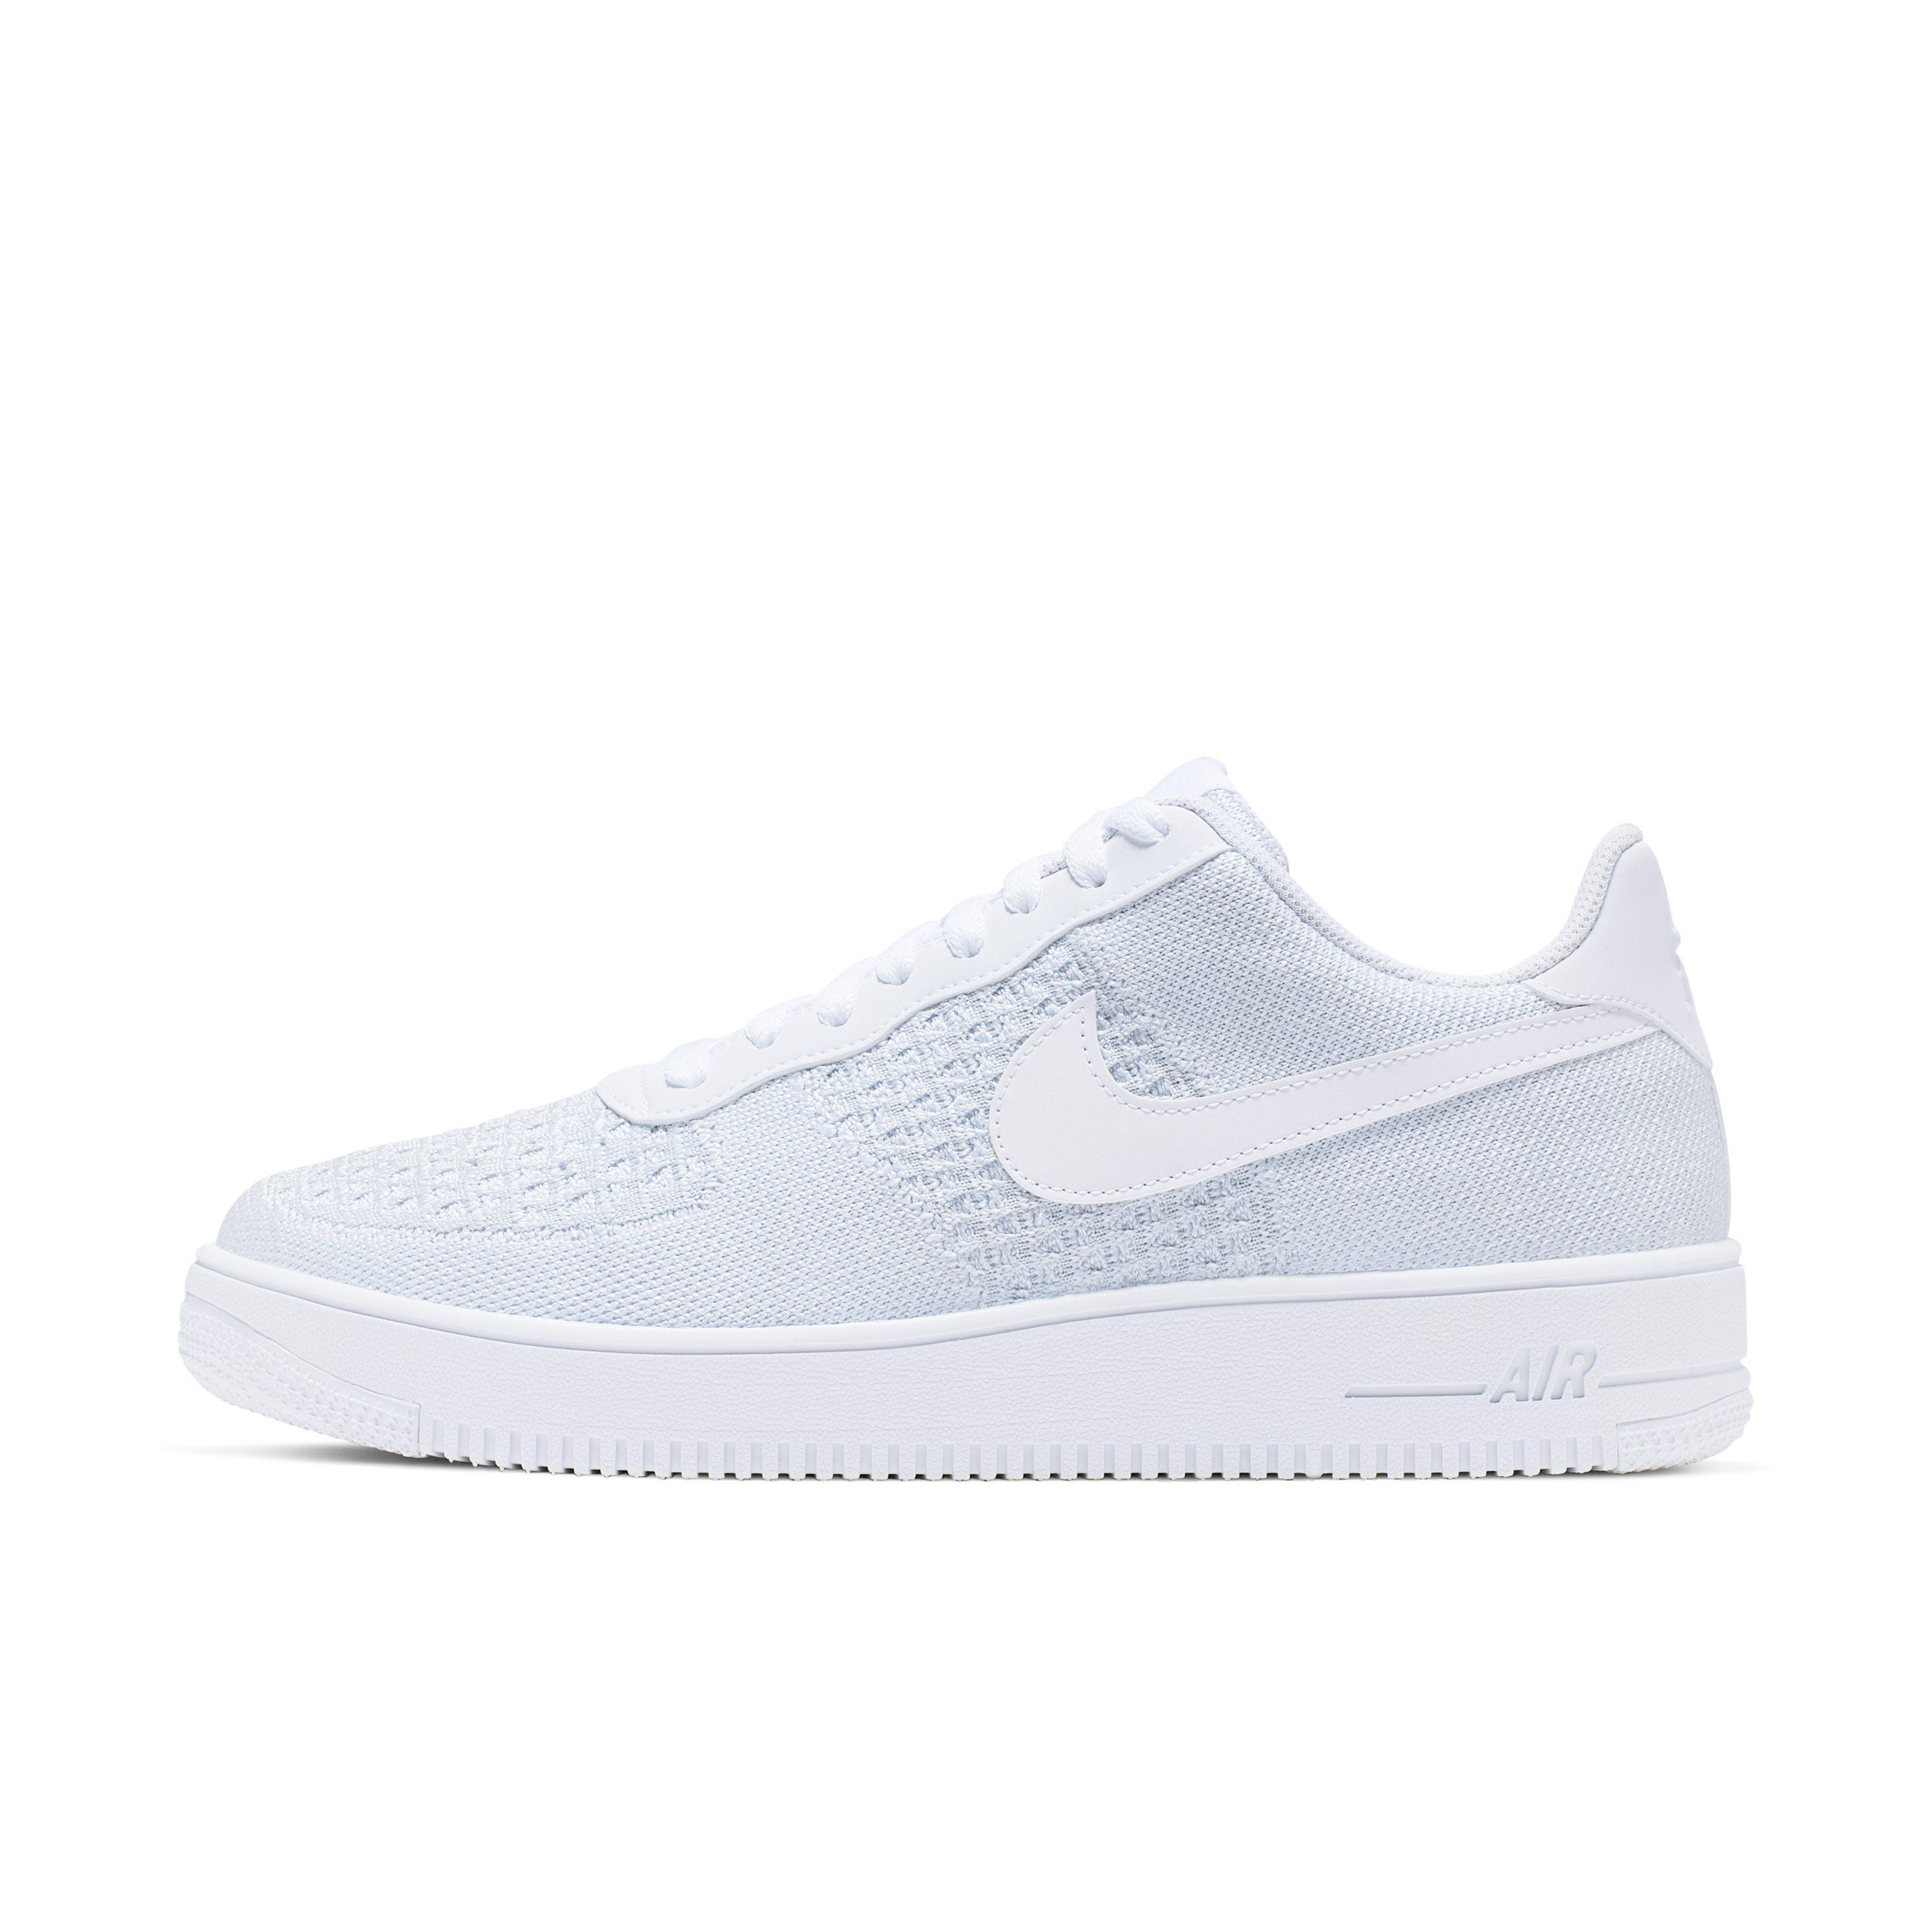 flyknit air force ones white